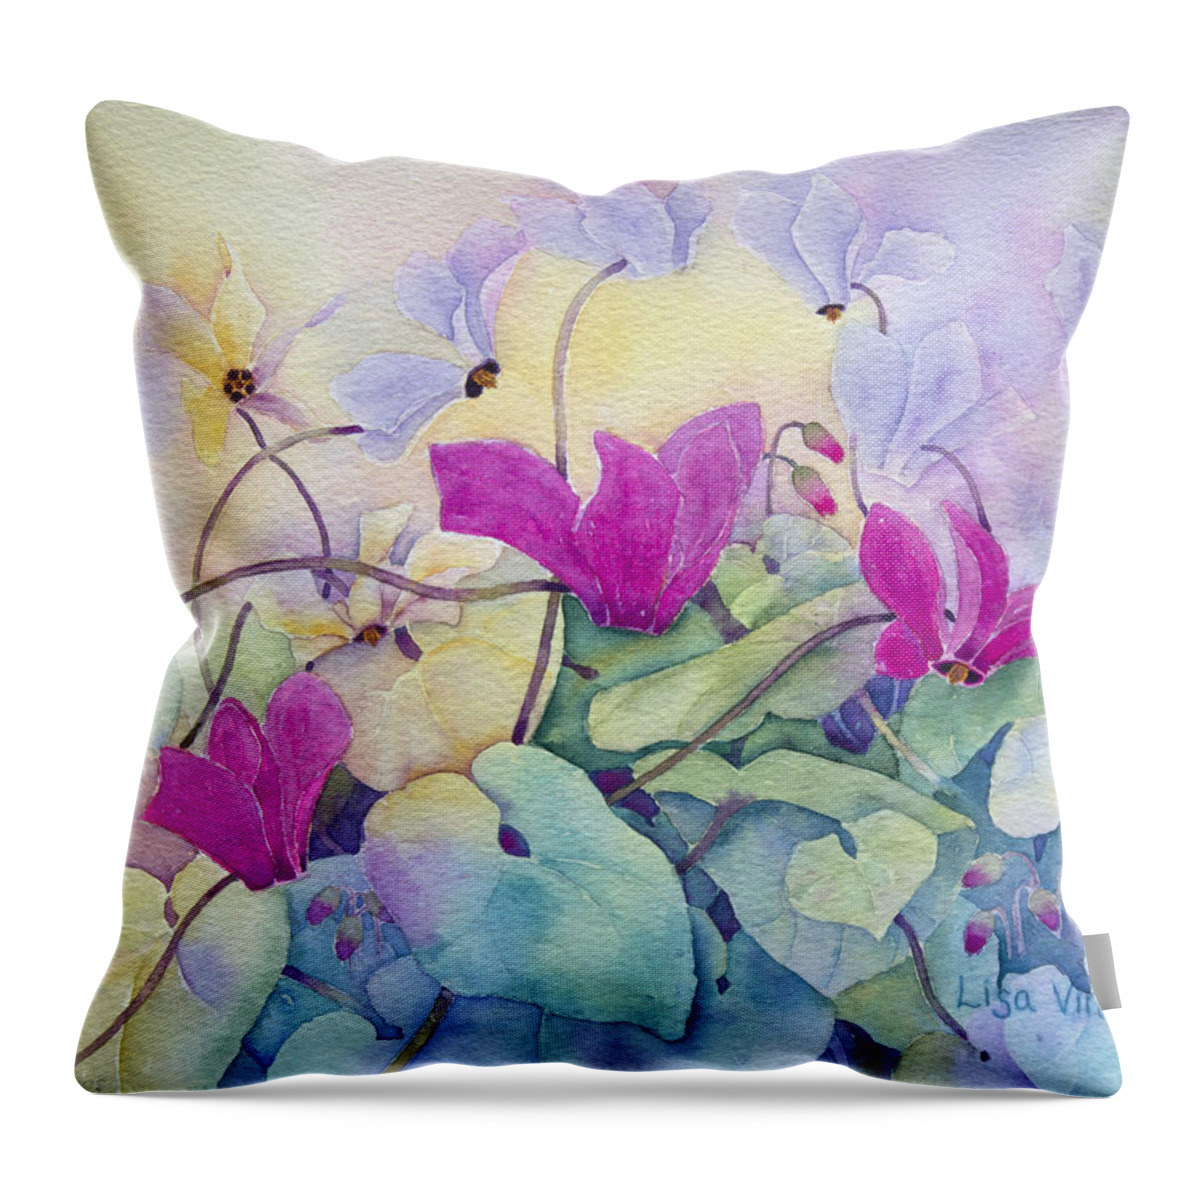 Giclee Throw Pillow featuring the painting Sierra Fuchsia by Lisa Vincent